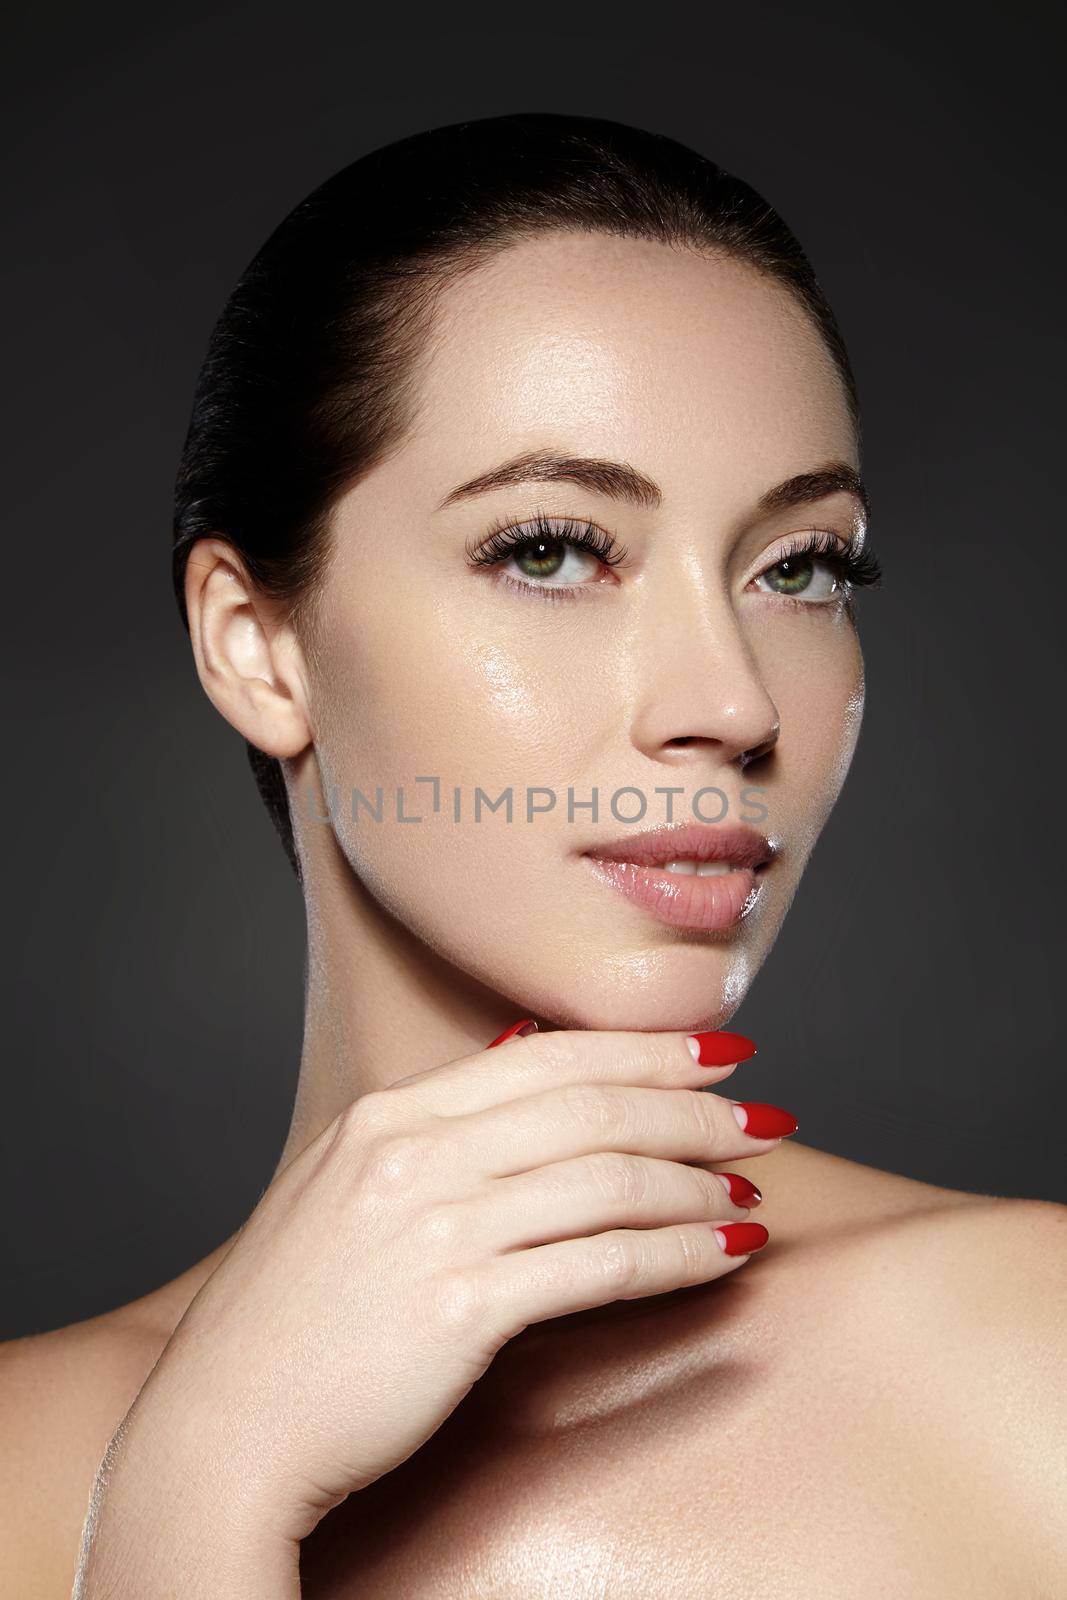 Beautiful woman show her erfect face with fashion make-up on dark grey background. Extreme eyelashes, plump lips, clean skin. Fresh spa look